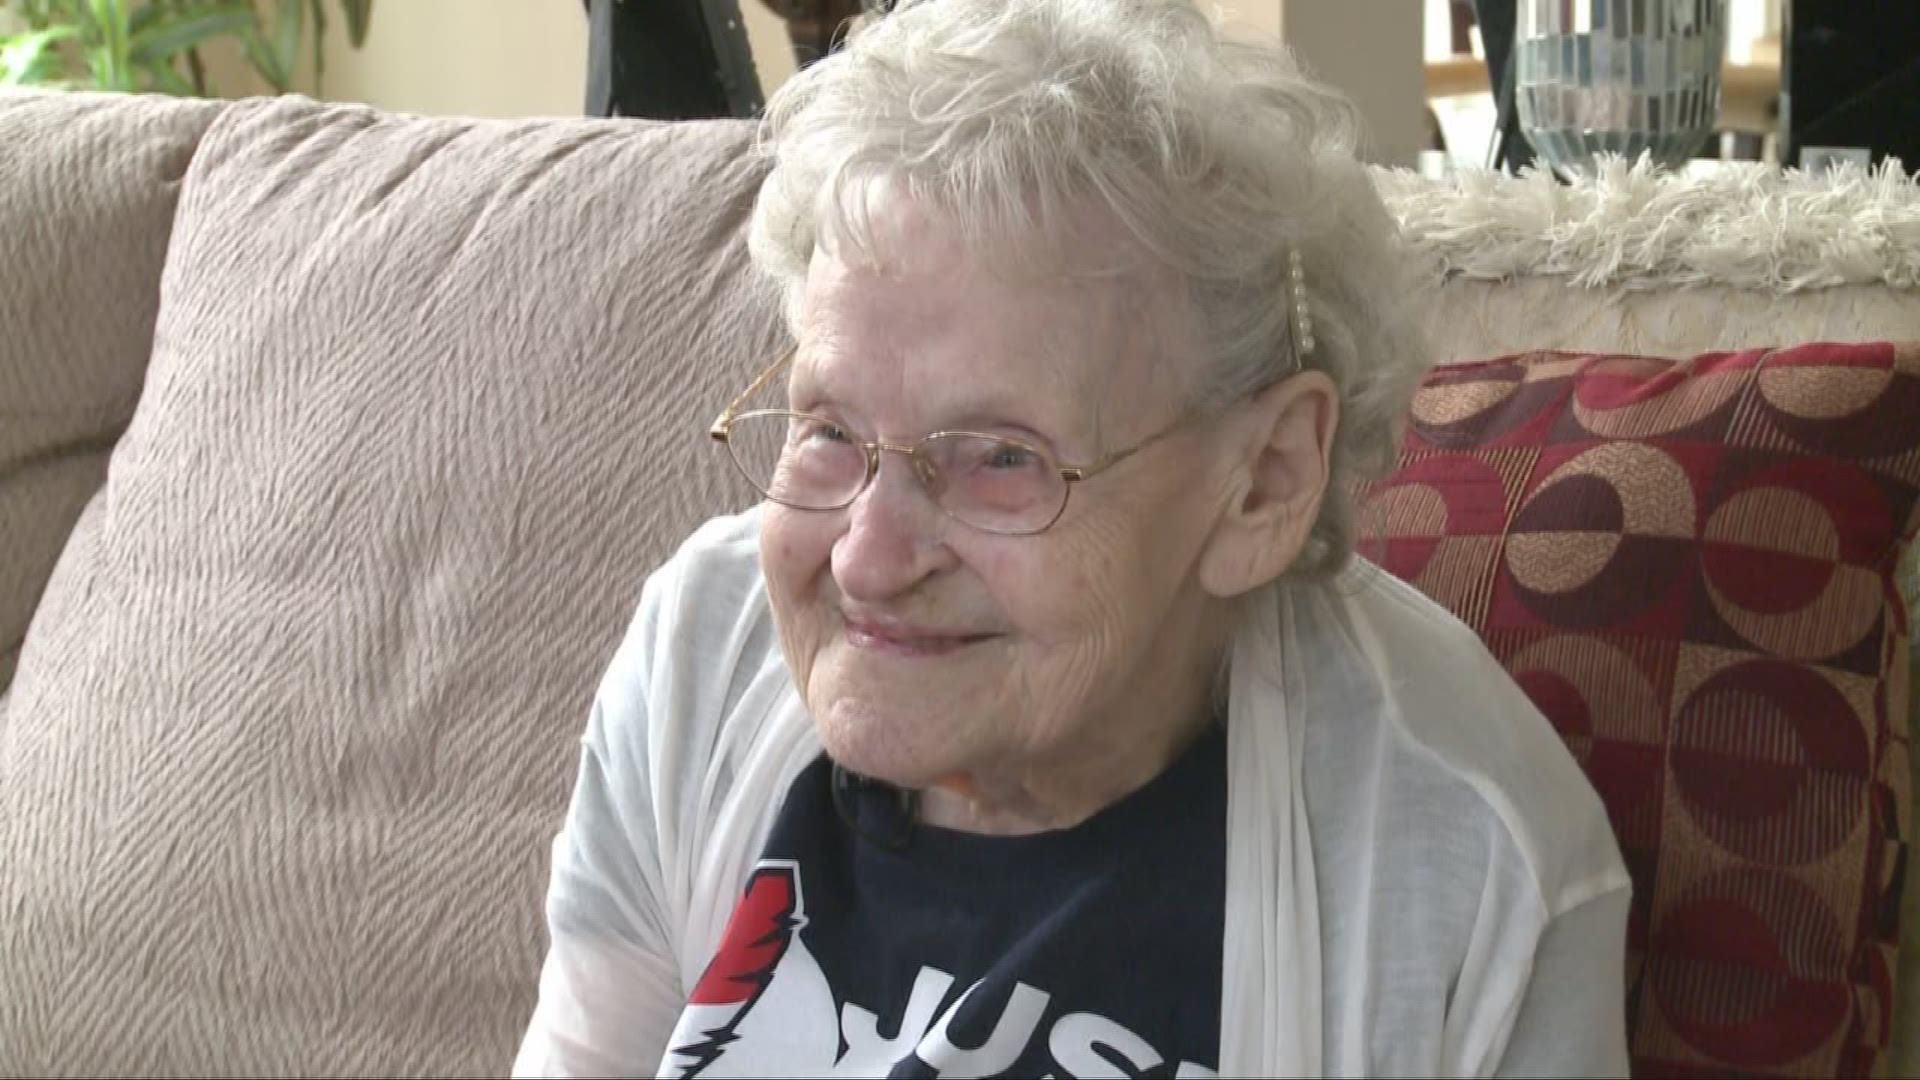 Nana, a friend of Channel 3, loves to get mail, and her family is hoping Nana will receive 105 birthday cards, which they will read on Facebook.